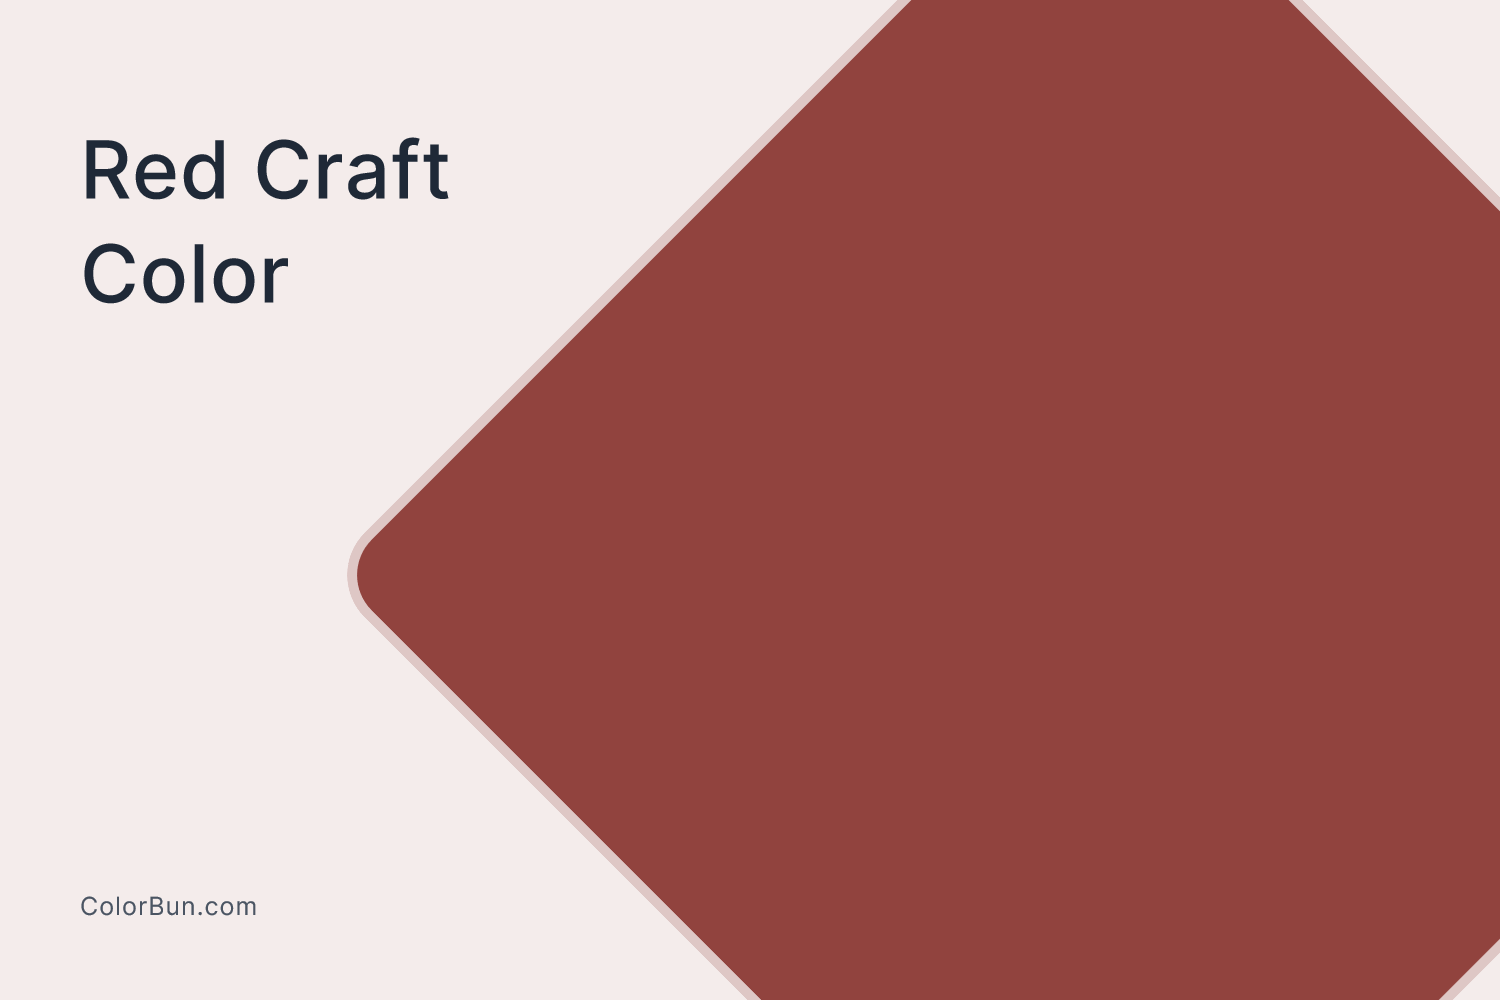 Red Craft color